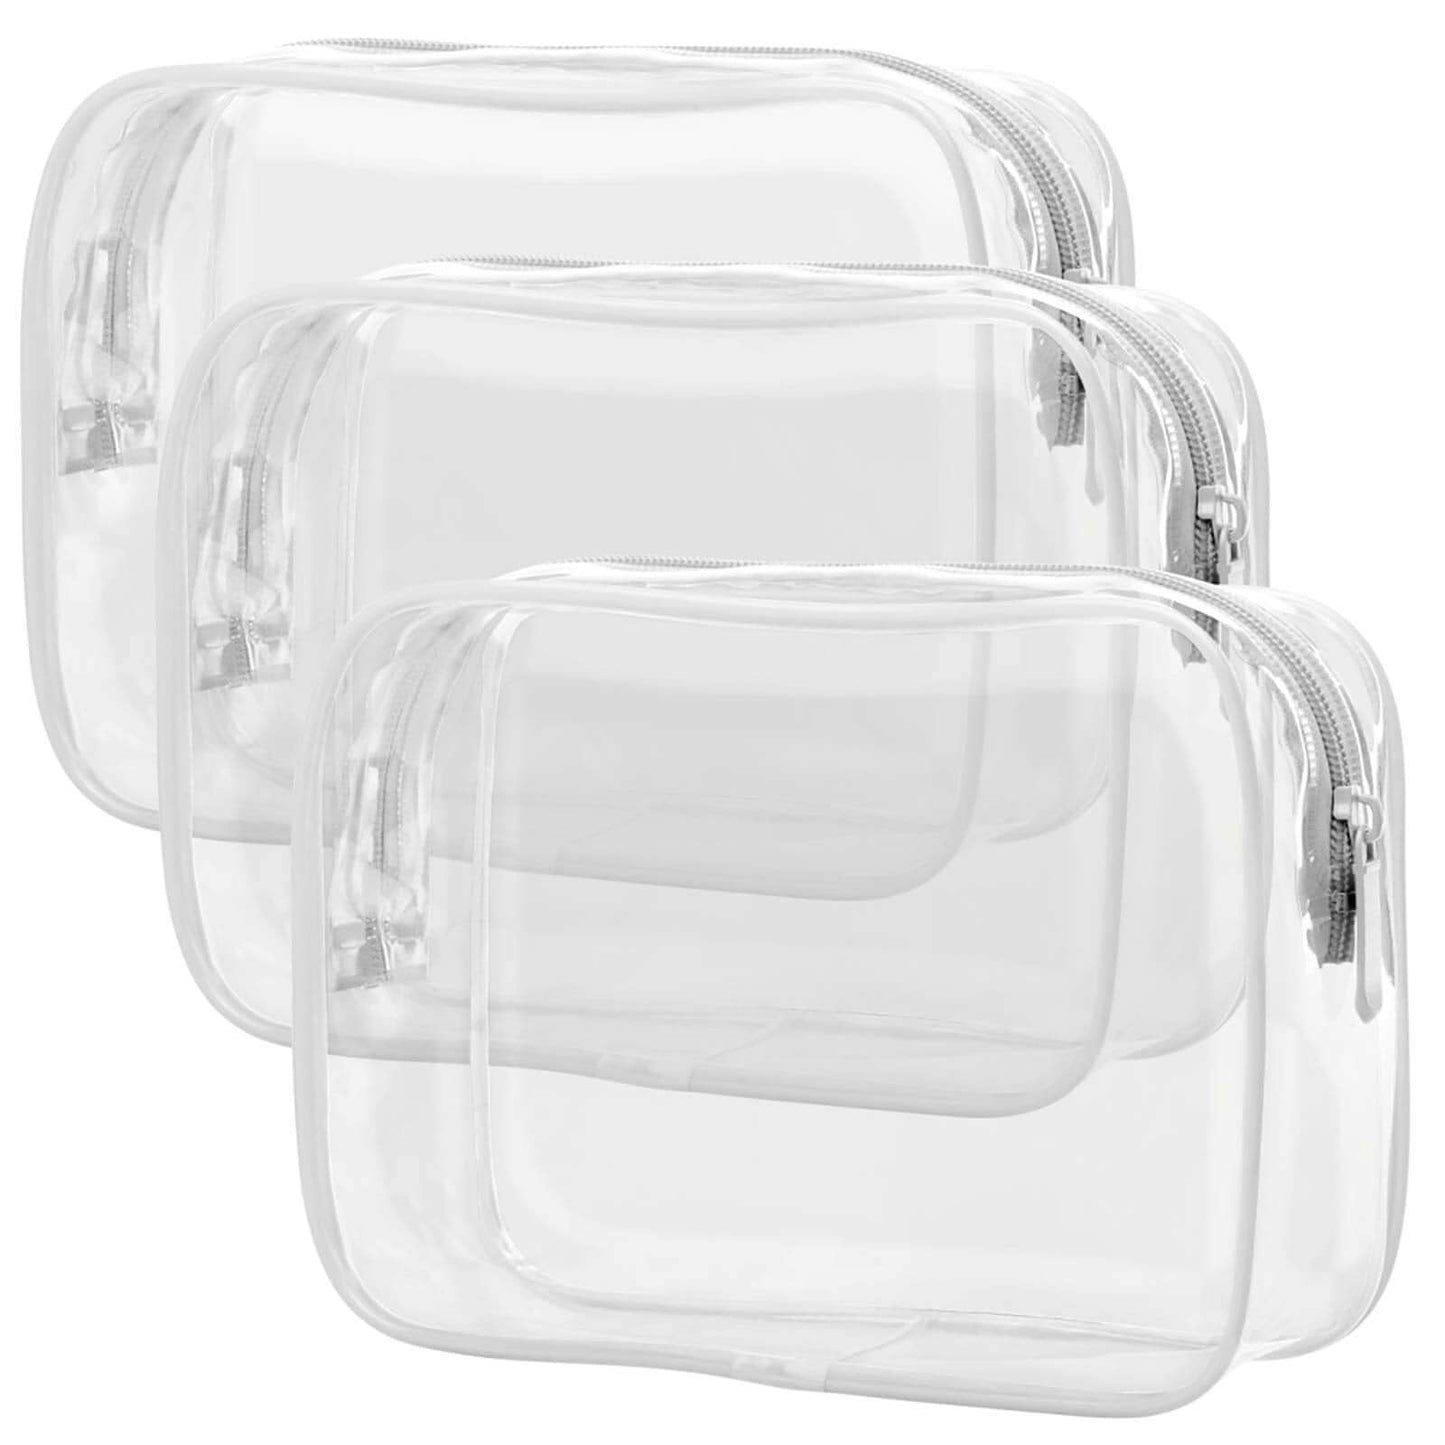 Transparent toiletry tote for women